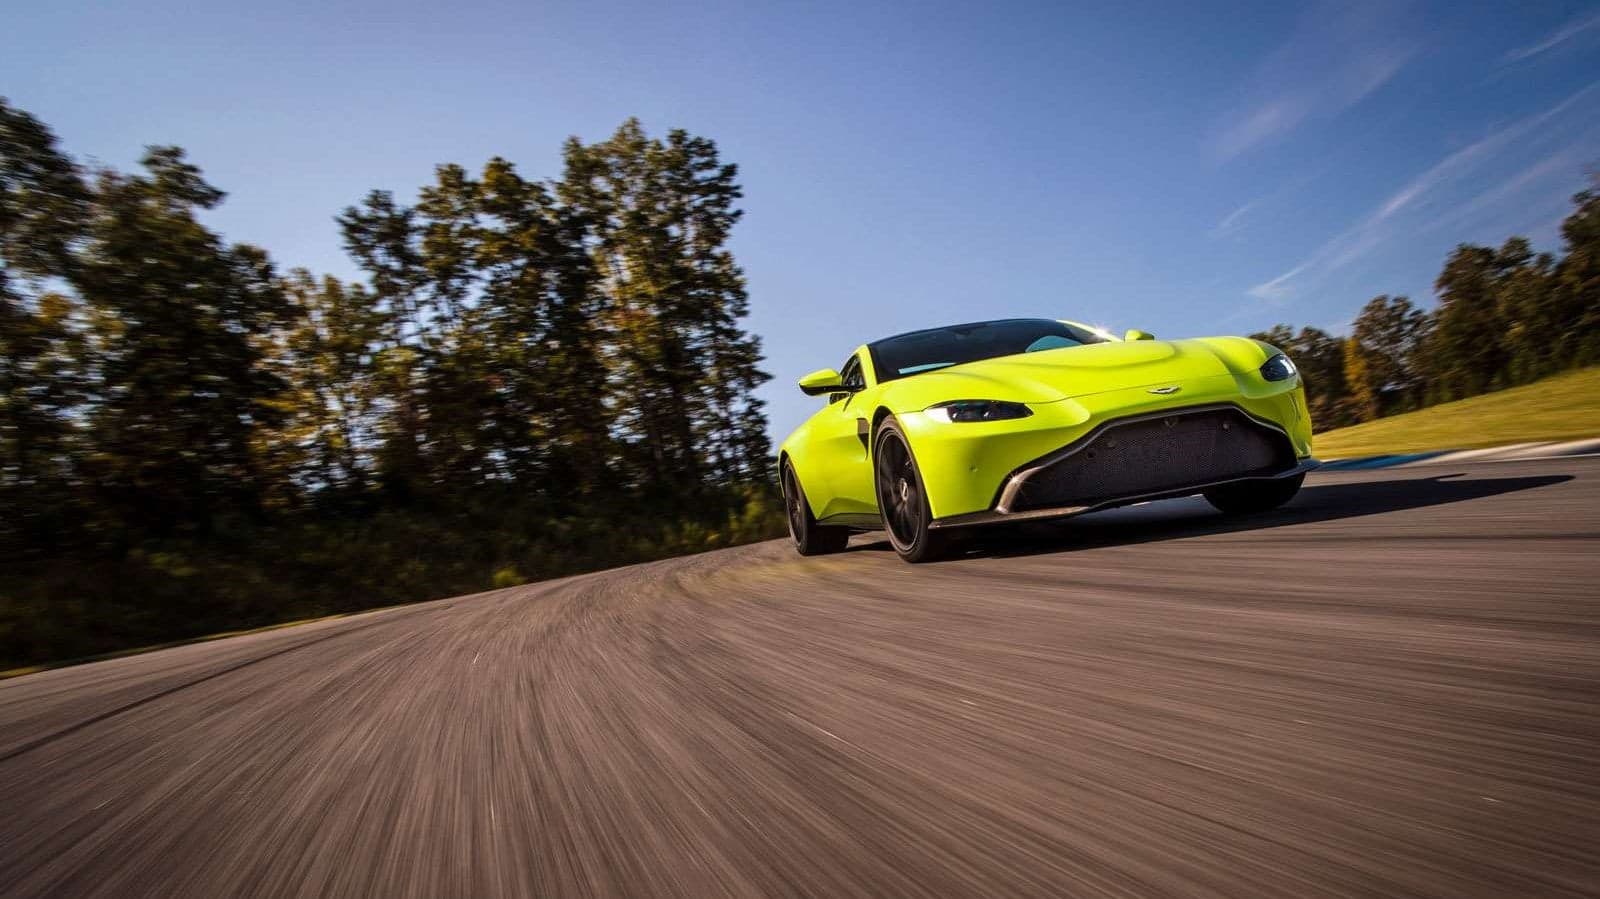 An AMG Inline-Six-Powered Aston Martin Vantage Might Be Happening